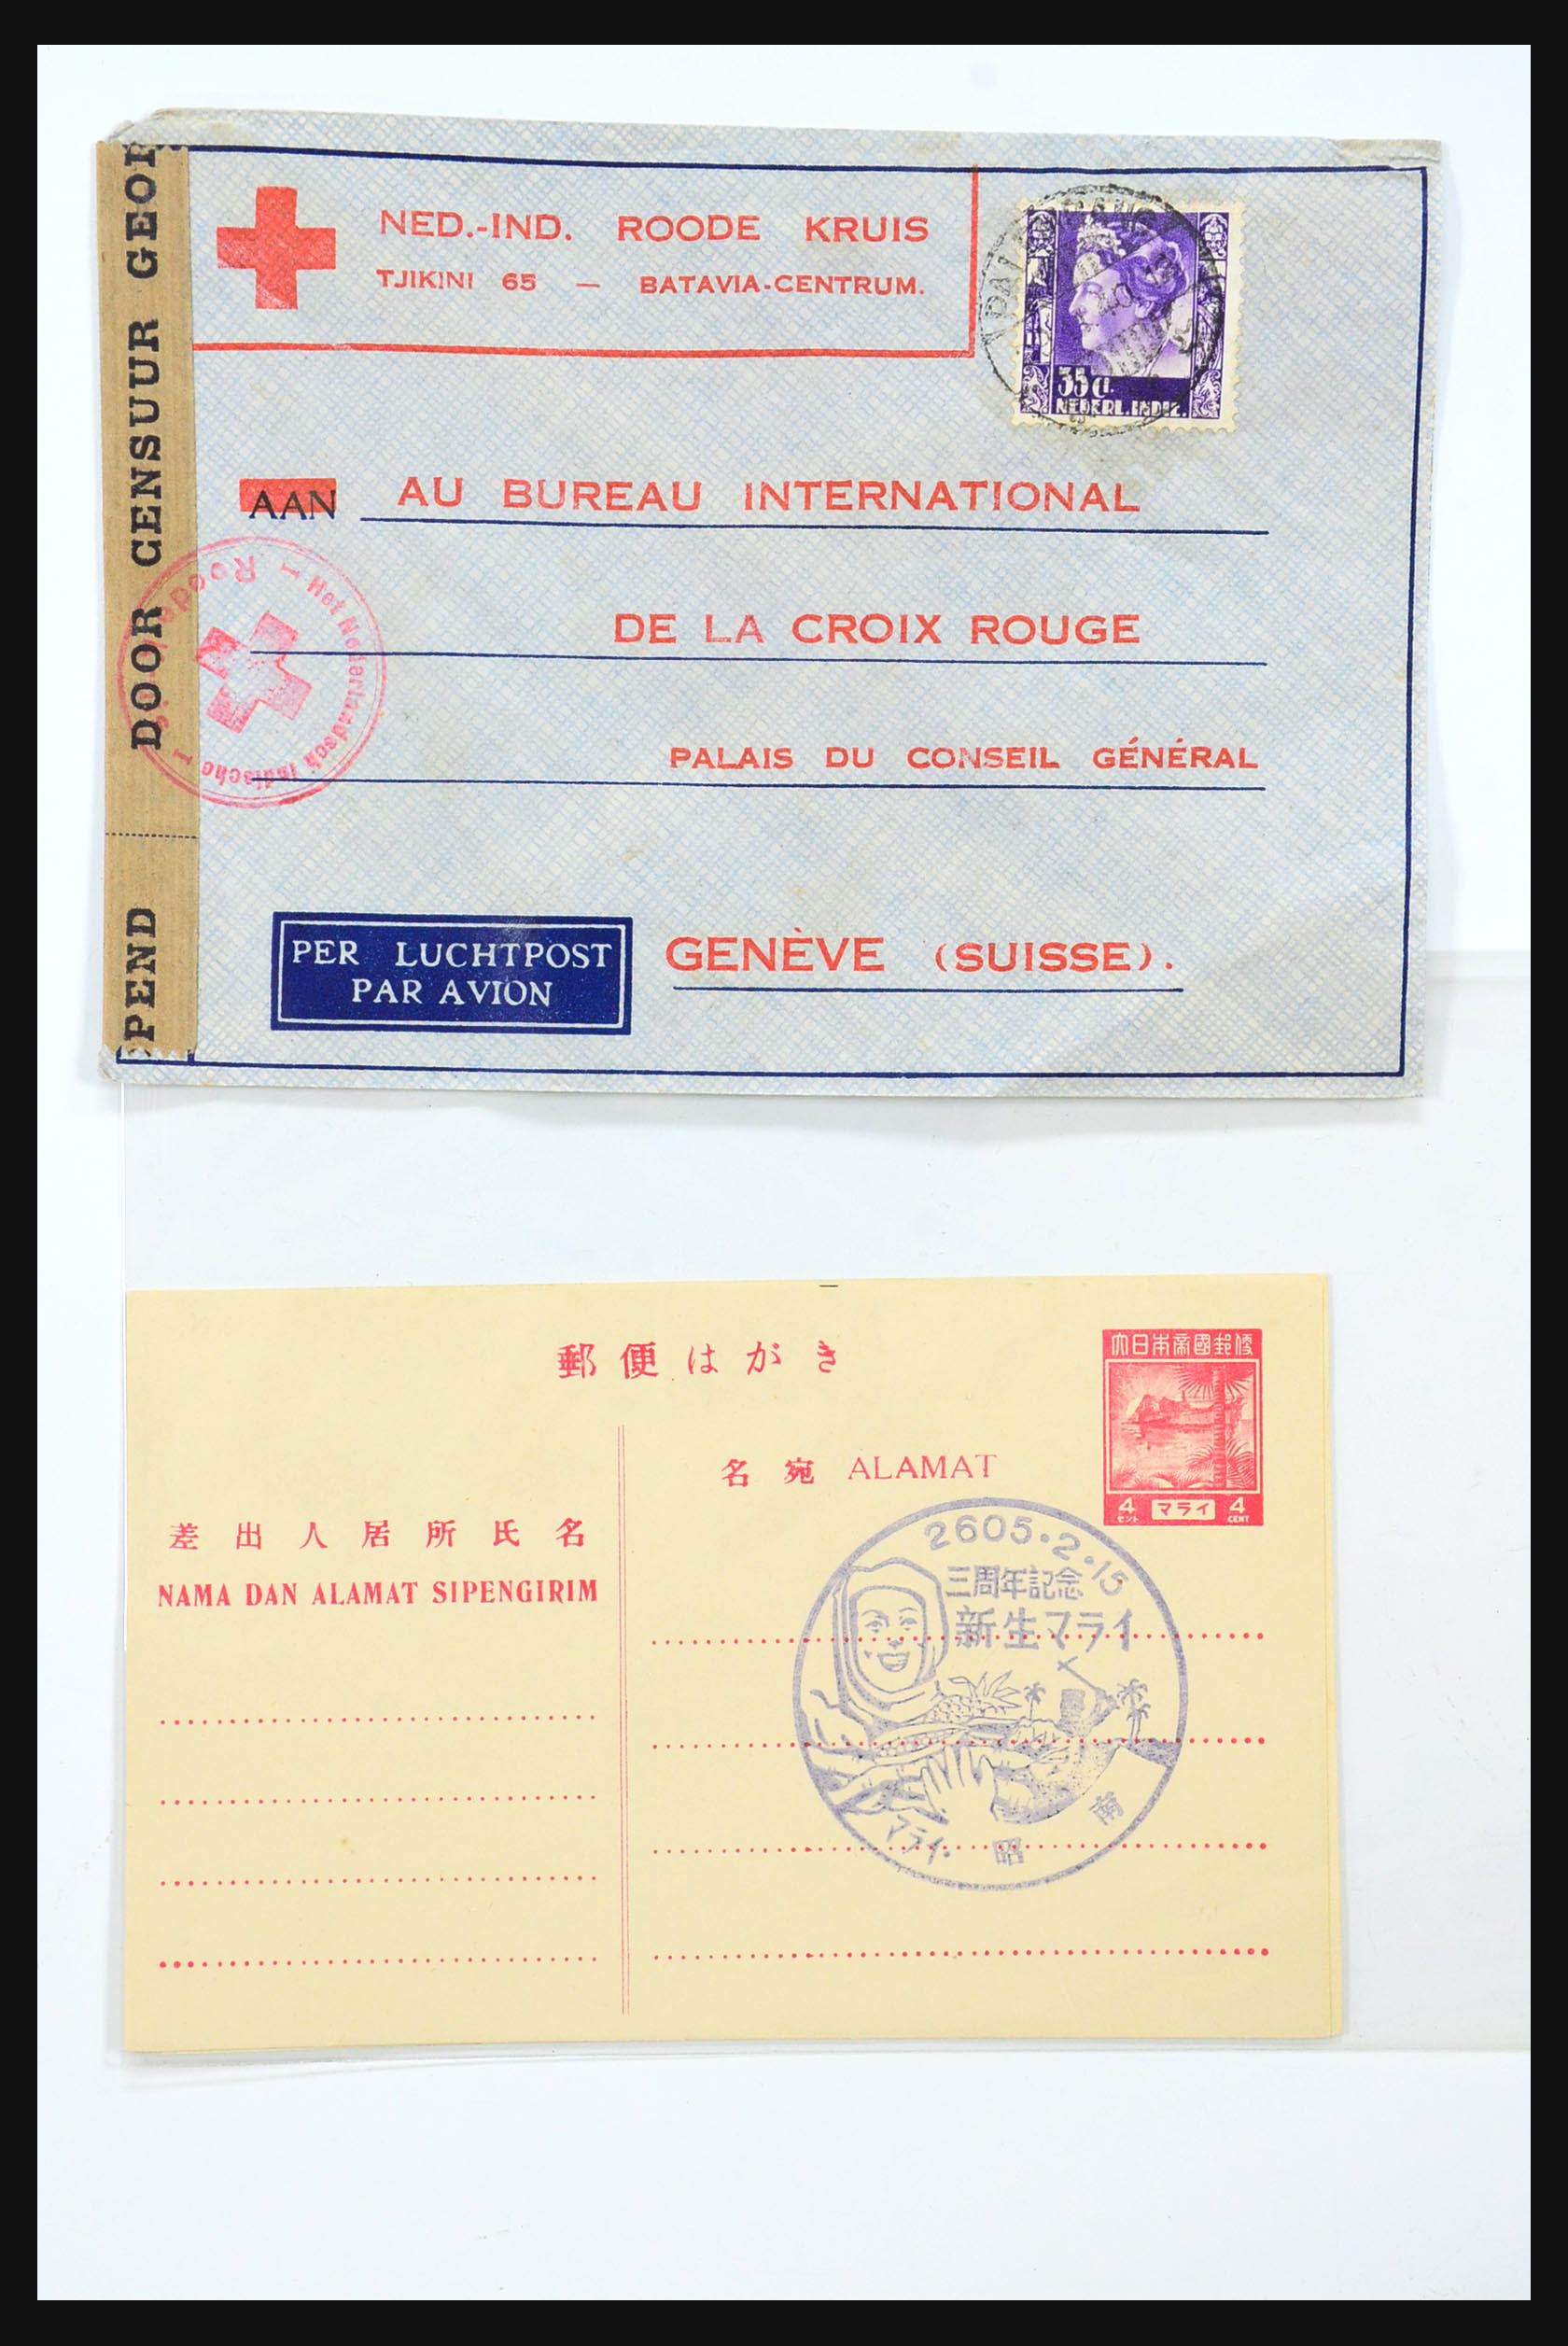 31362 089 - 31362 Netherlands Indies Japanese occupation covers 1942-1945.